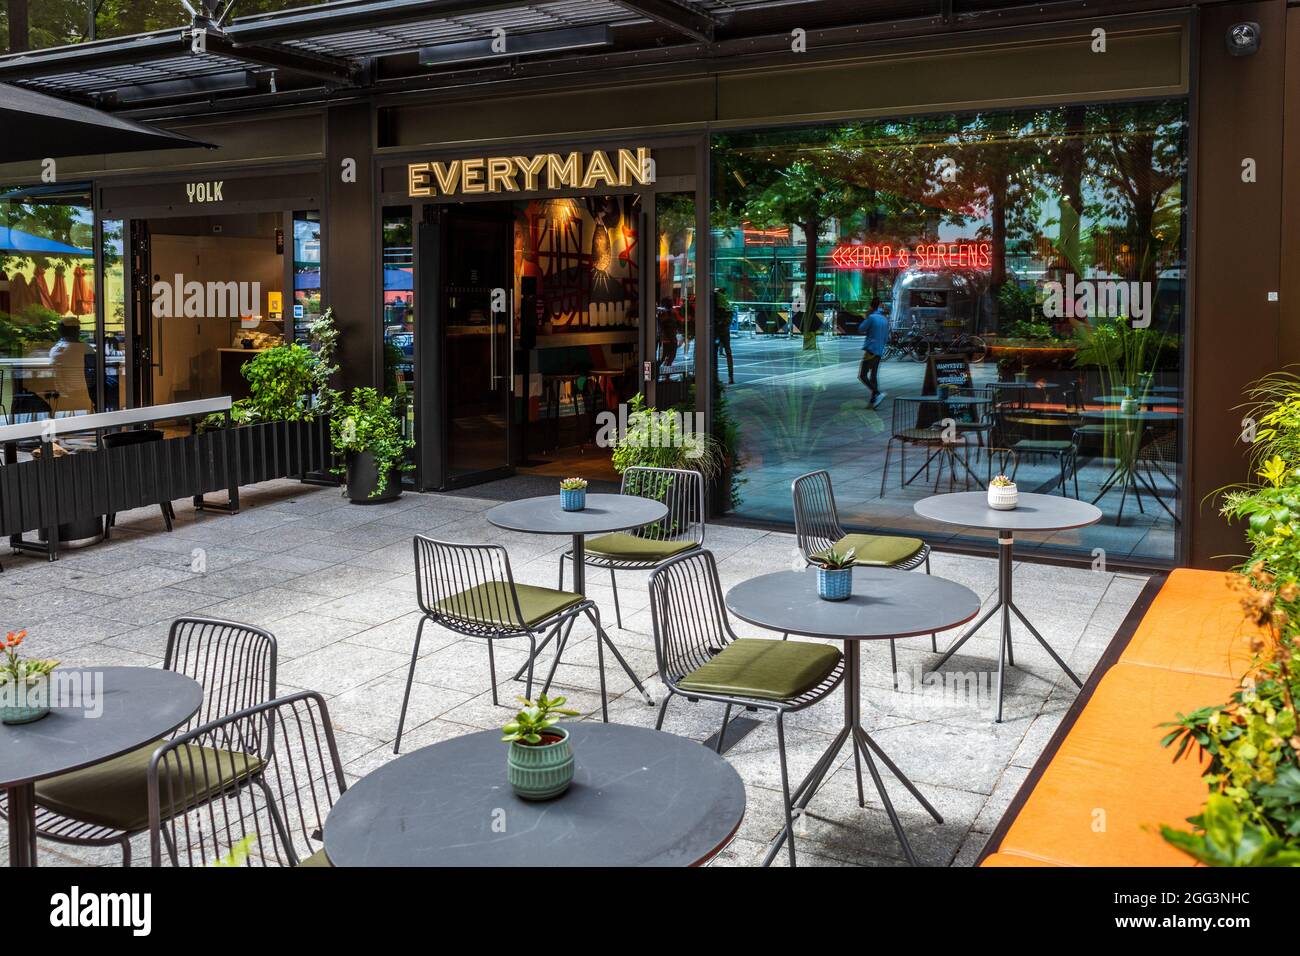 The Everyman Broadgate Cinema and Bar - Boutique Cinema and Cafe / Bar at the Broadgate Centre in the City of London. Stock Photo